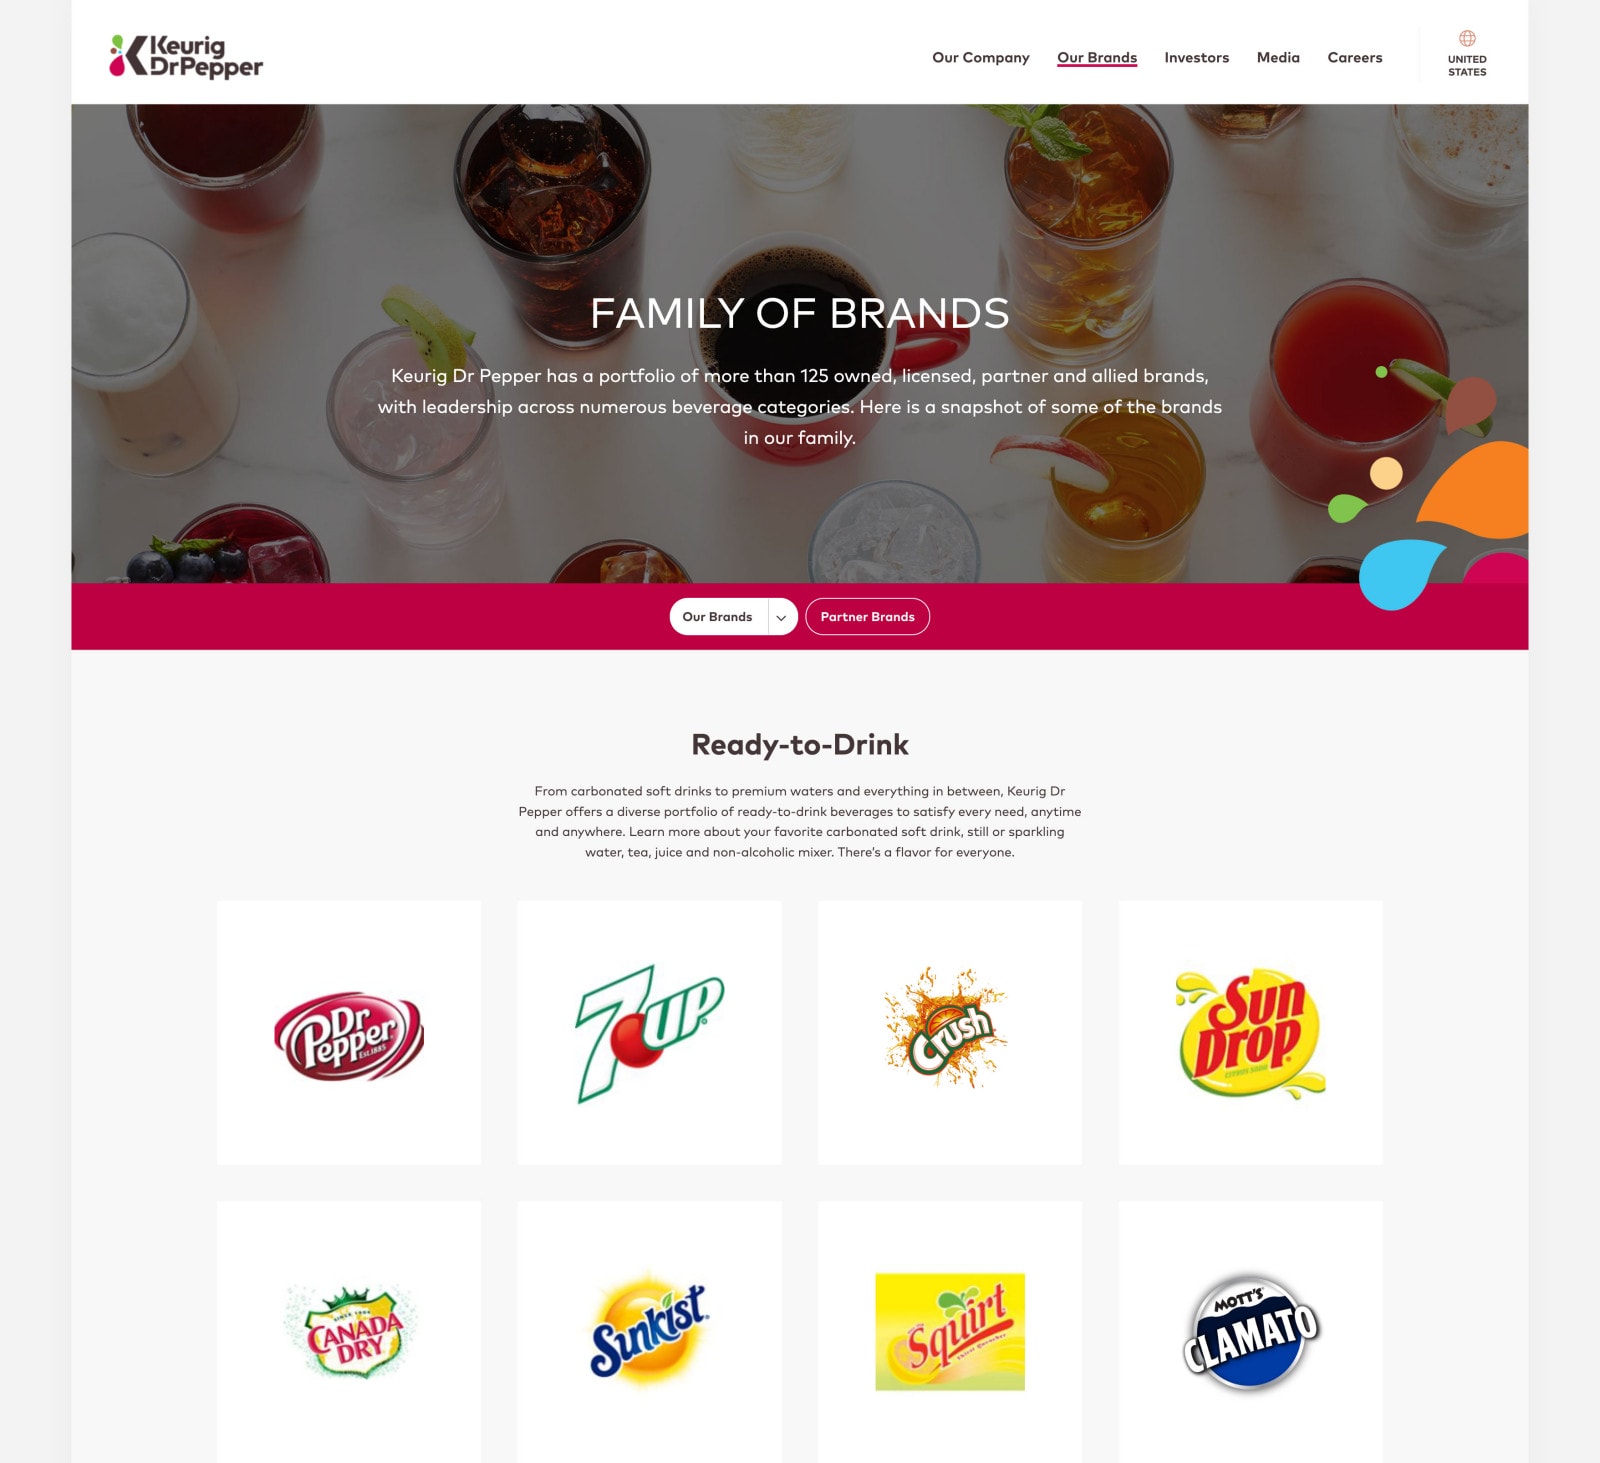 Keurig Dr Pepper family of brands page